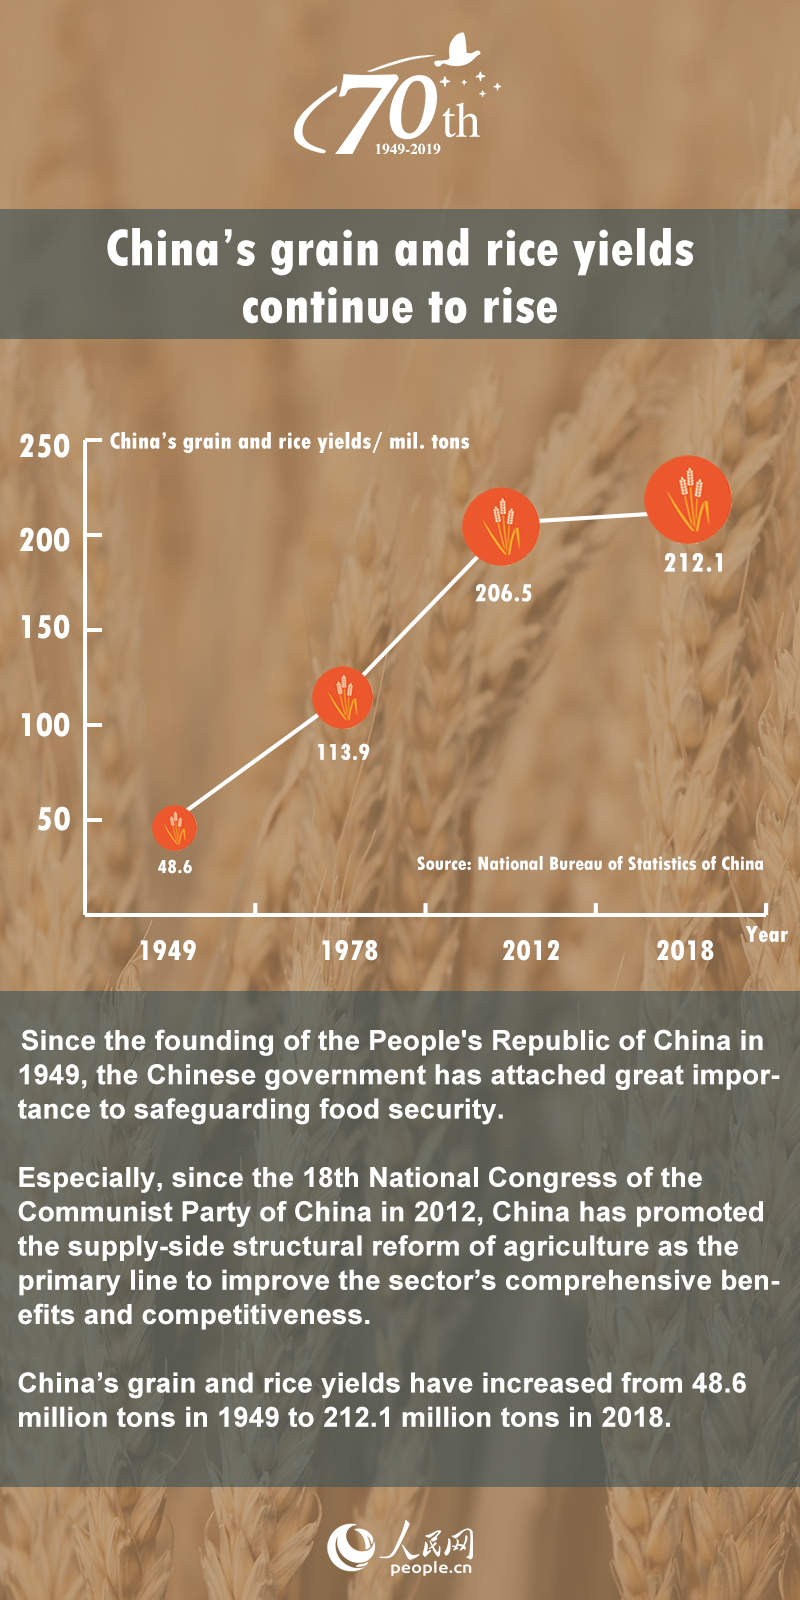 China in 70 years: China's grain and rice yields continue to rise